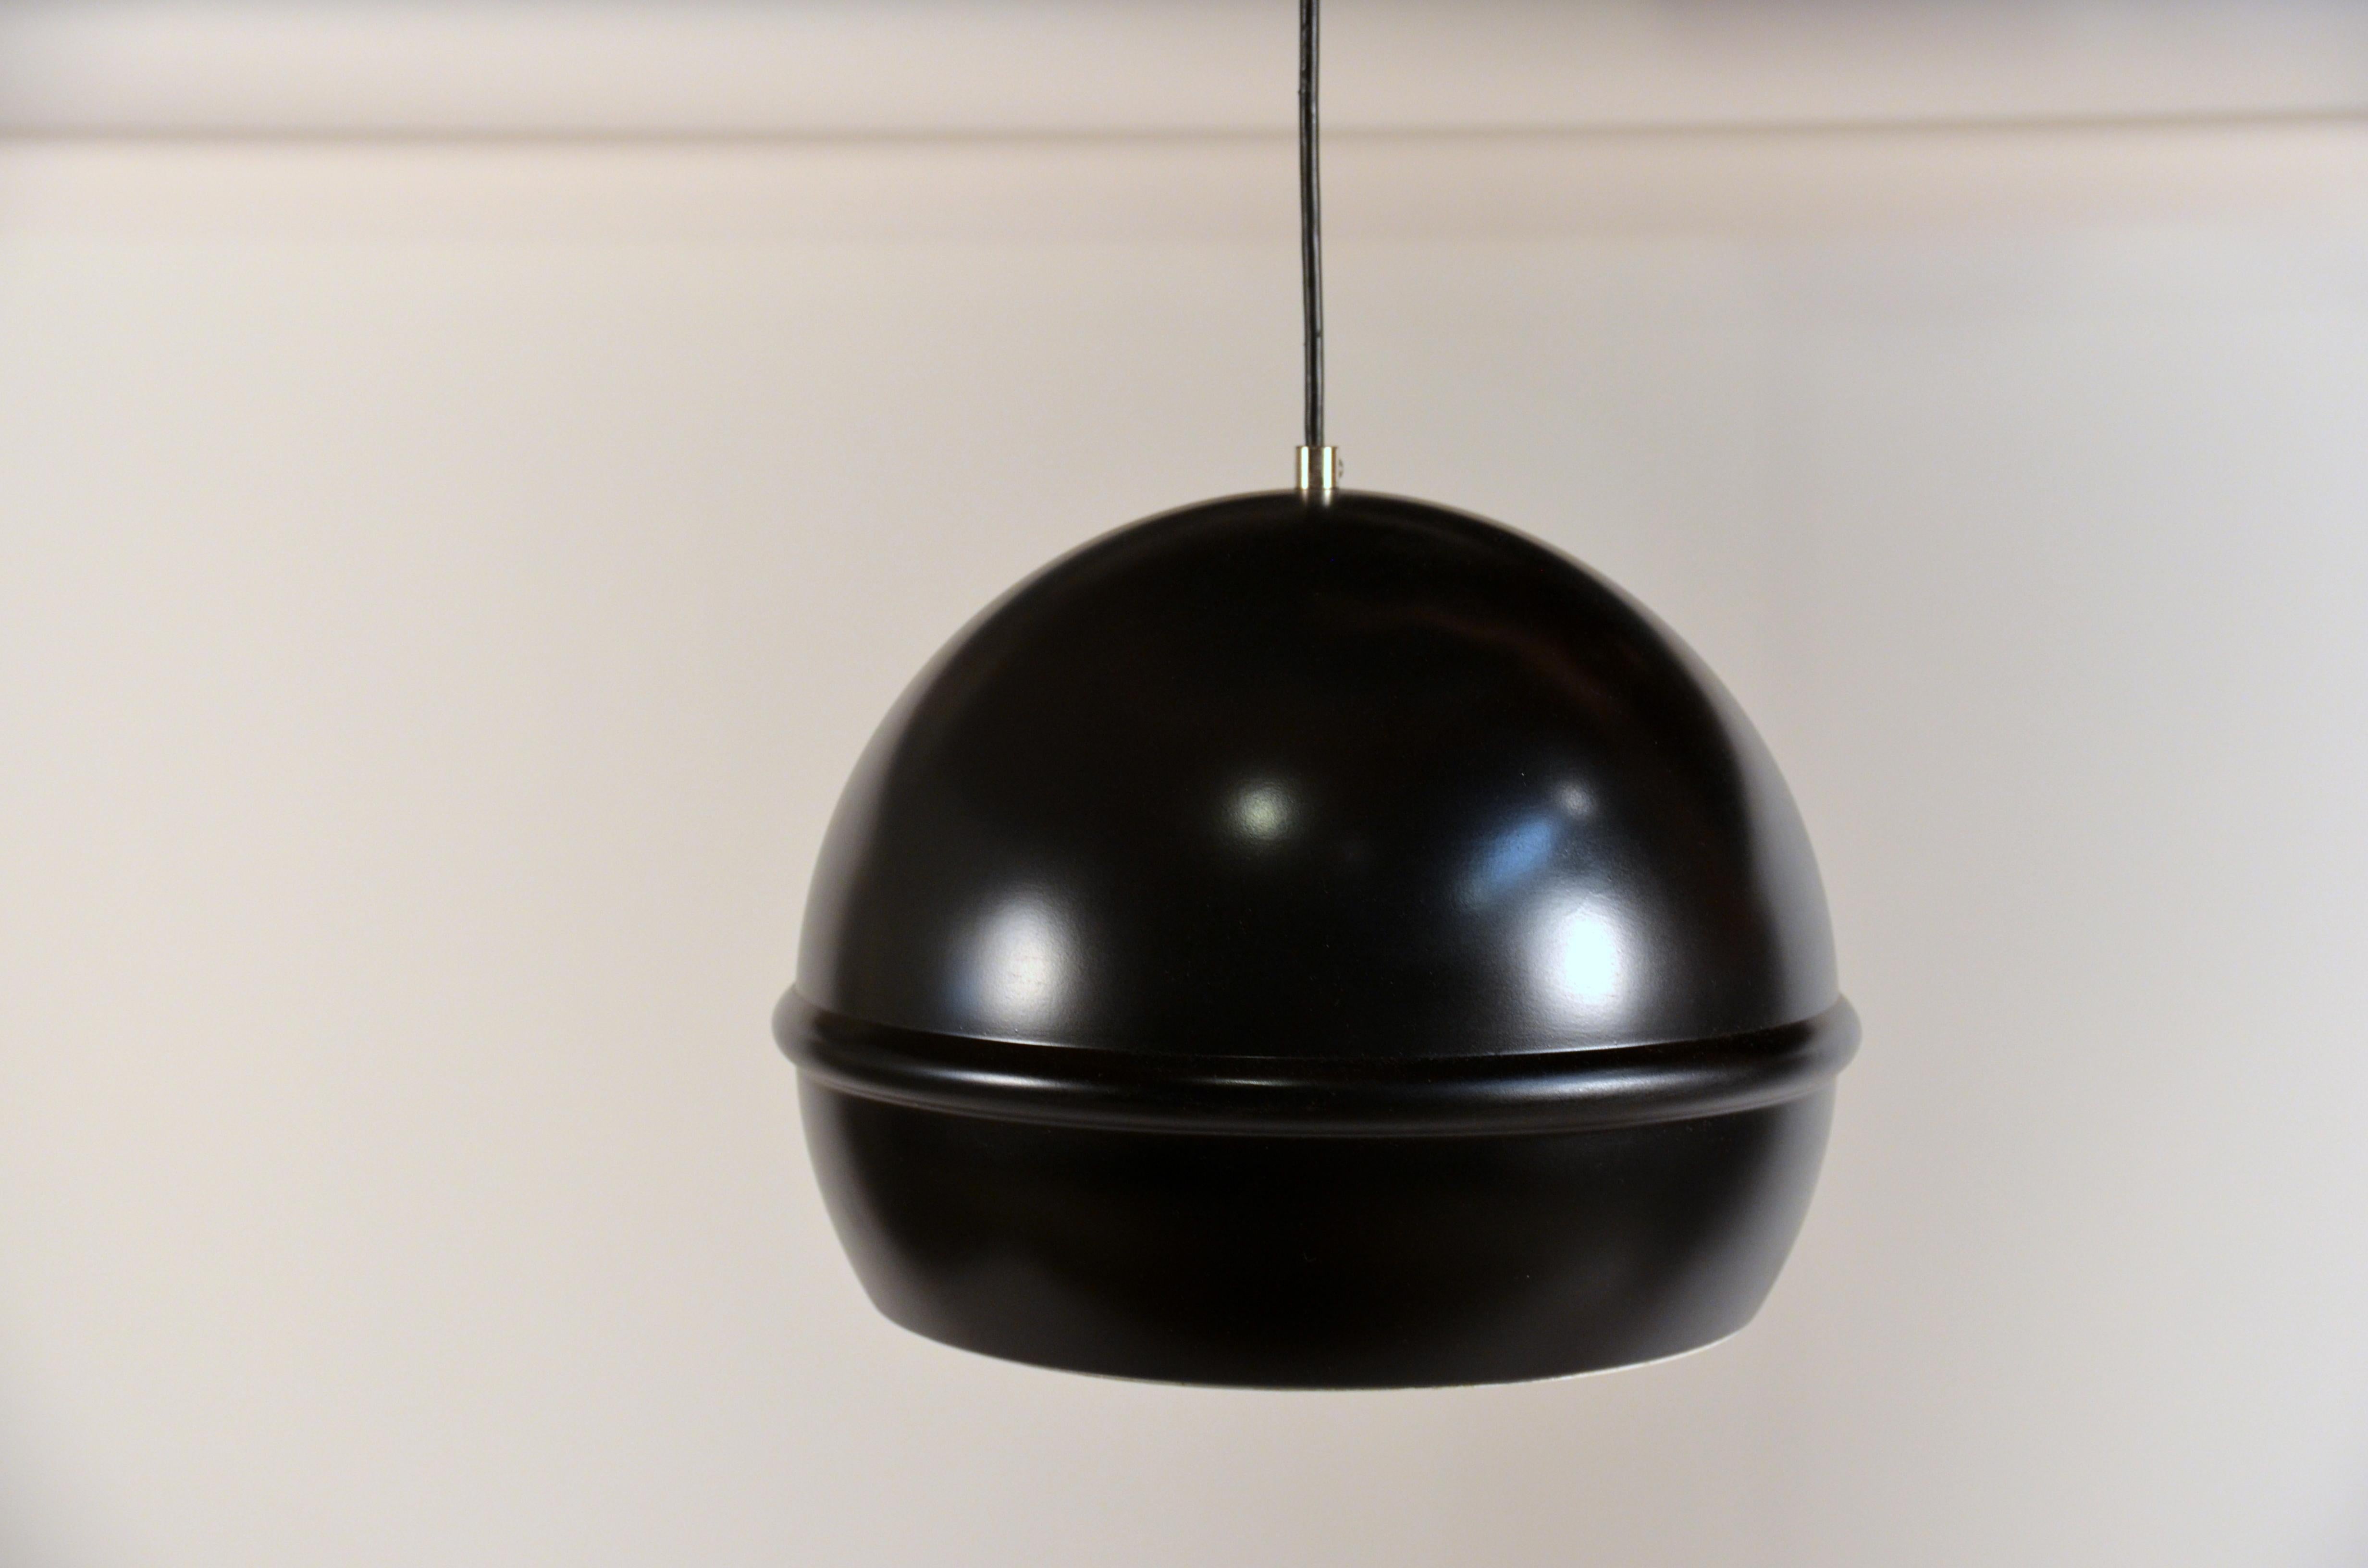 Set of 7 French 1960s black globe pendants. Matching canopies.

Can be installed aligned, in a grid, or in a cluster at different heights.

Perfect with silver- or gold-tipped bulbs.

Priced as a set of 8 but can also be sold